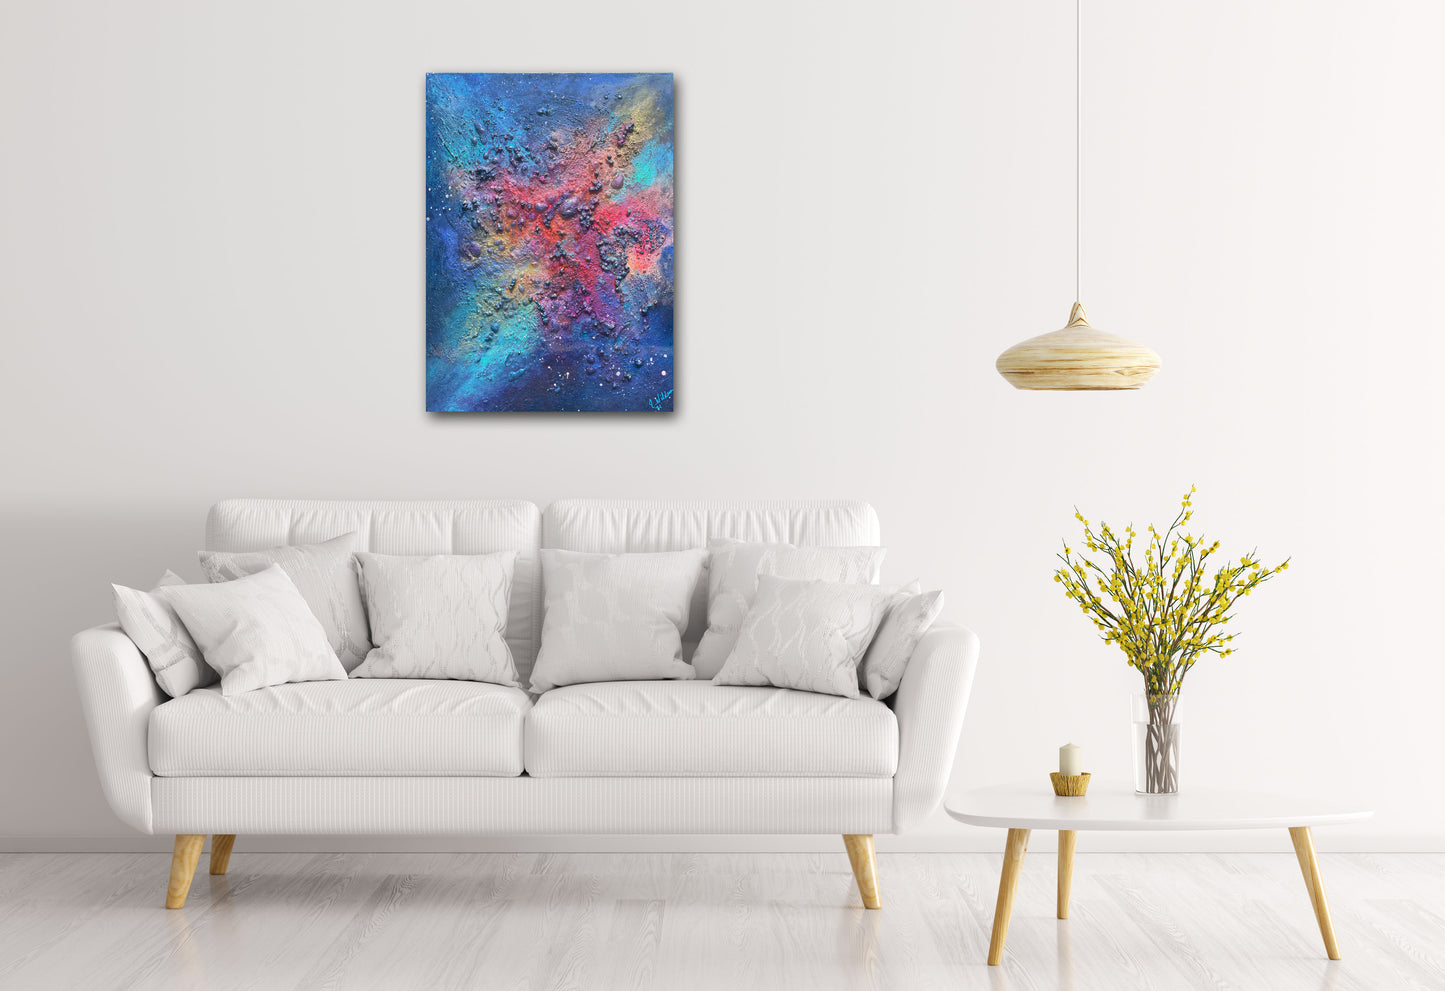 Feeling the Movement - SOLD